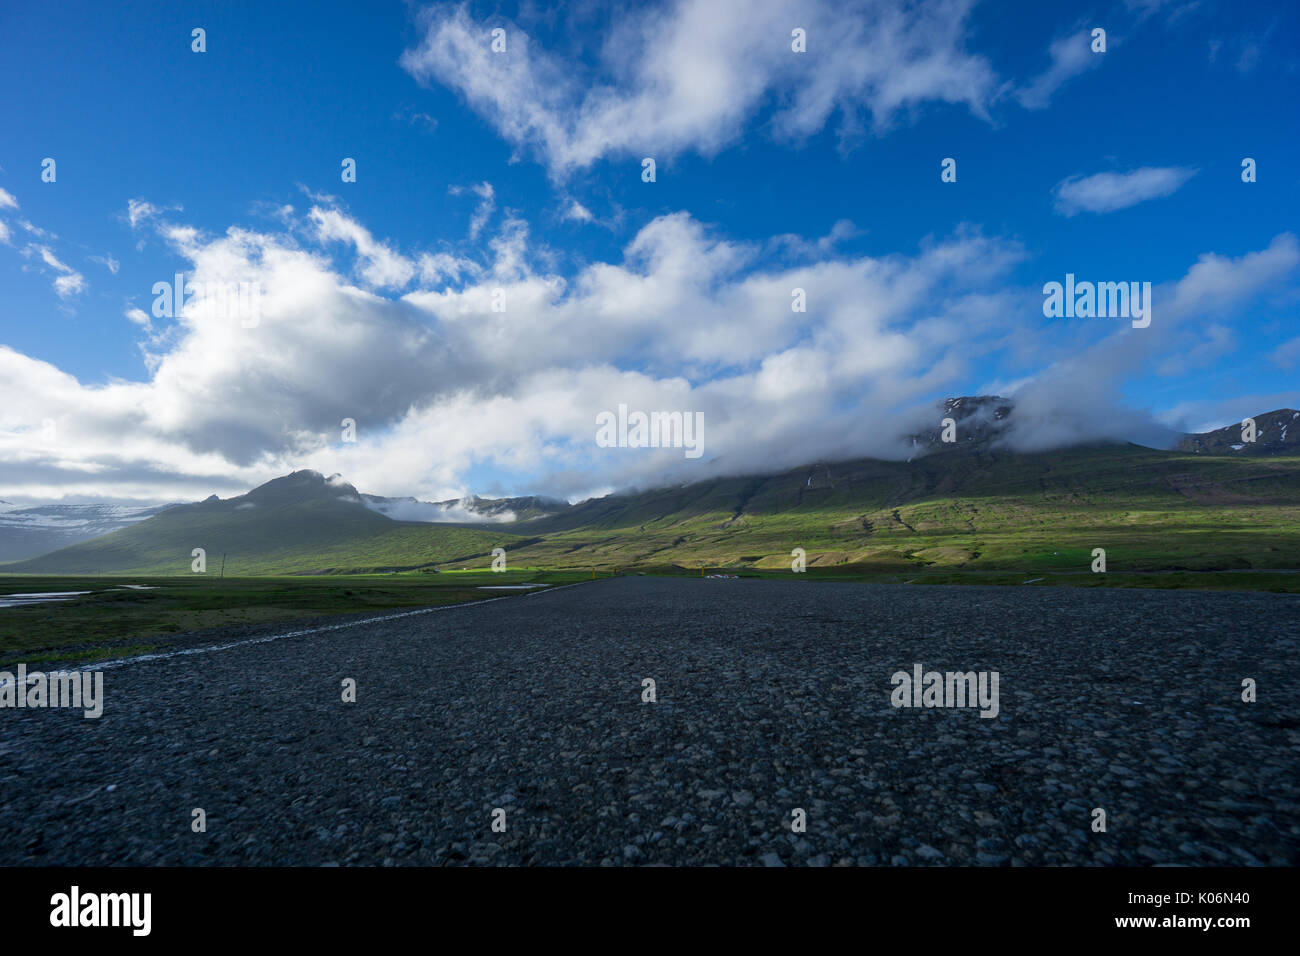 Iceland - Empty endless highway route 1 at shining green mountains Stock Photo